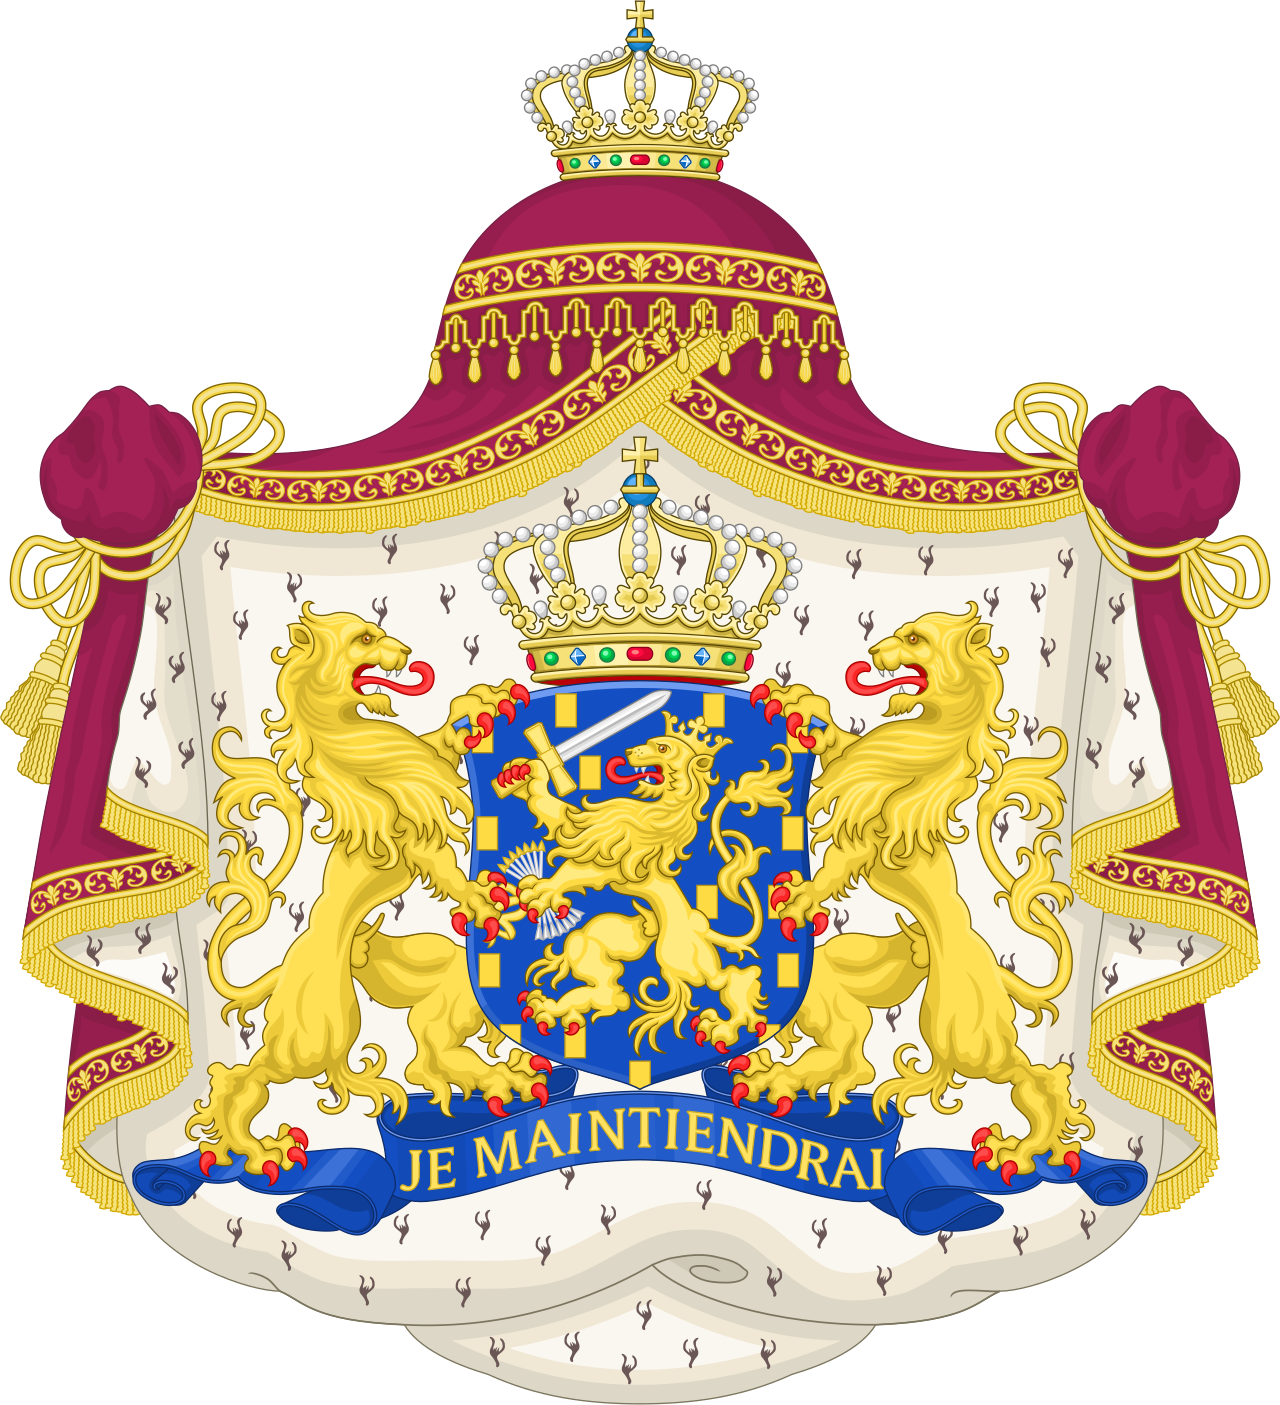 Name:  1280px-Royal_coat_of_arms_of_the_Netherlands.svg.png
Views: 171
Size:  1.29 MB